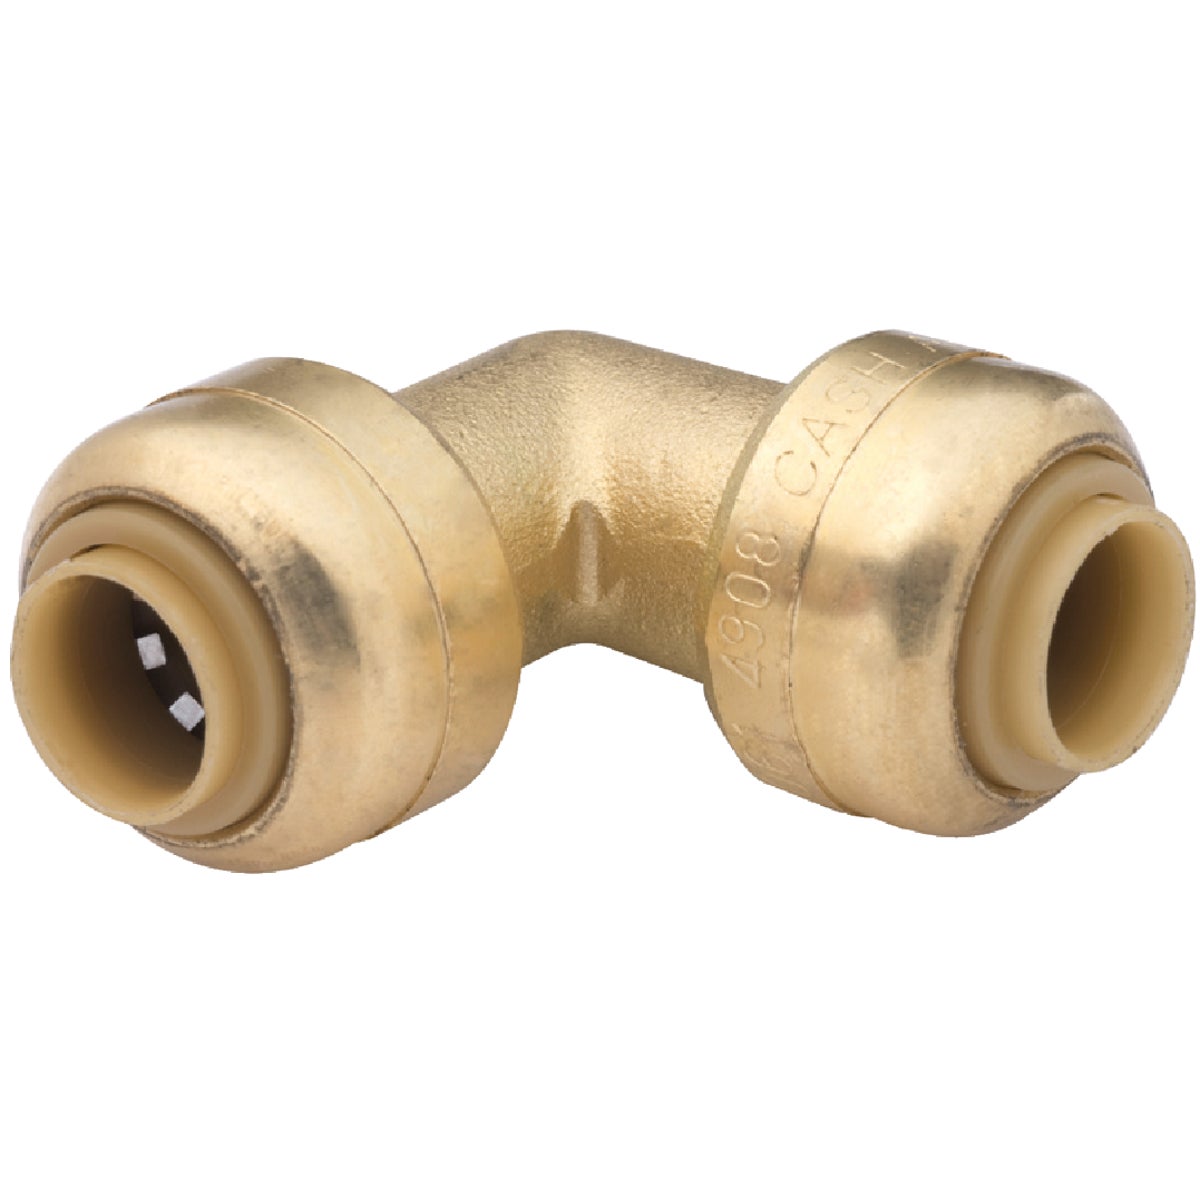 Item 467211, SharkBite Max push-to-connect fittings allow you make pipe connections with